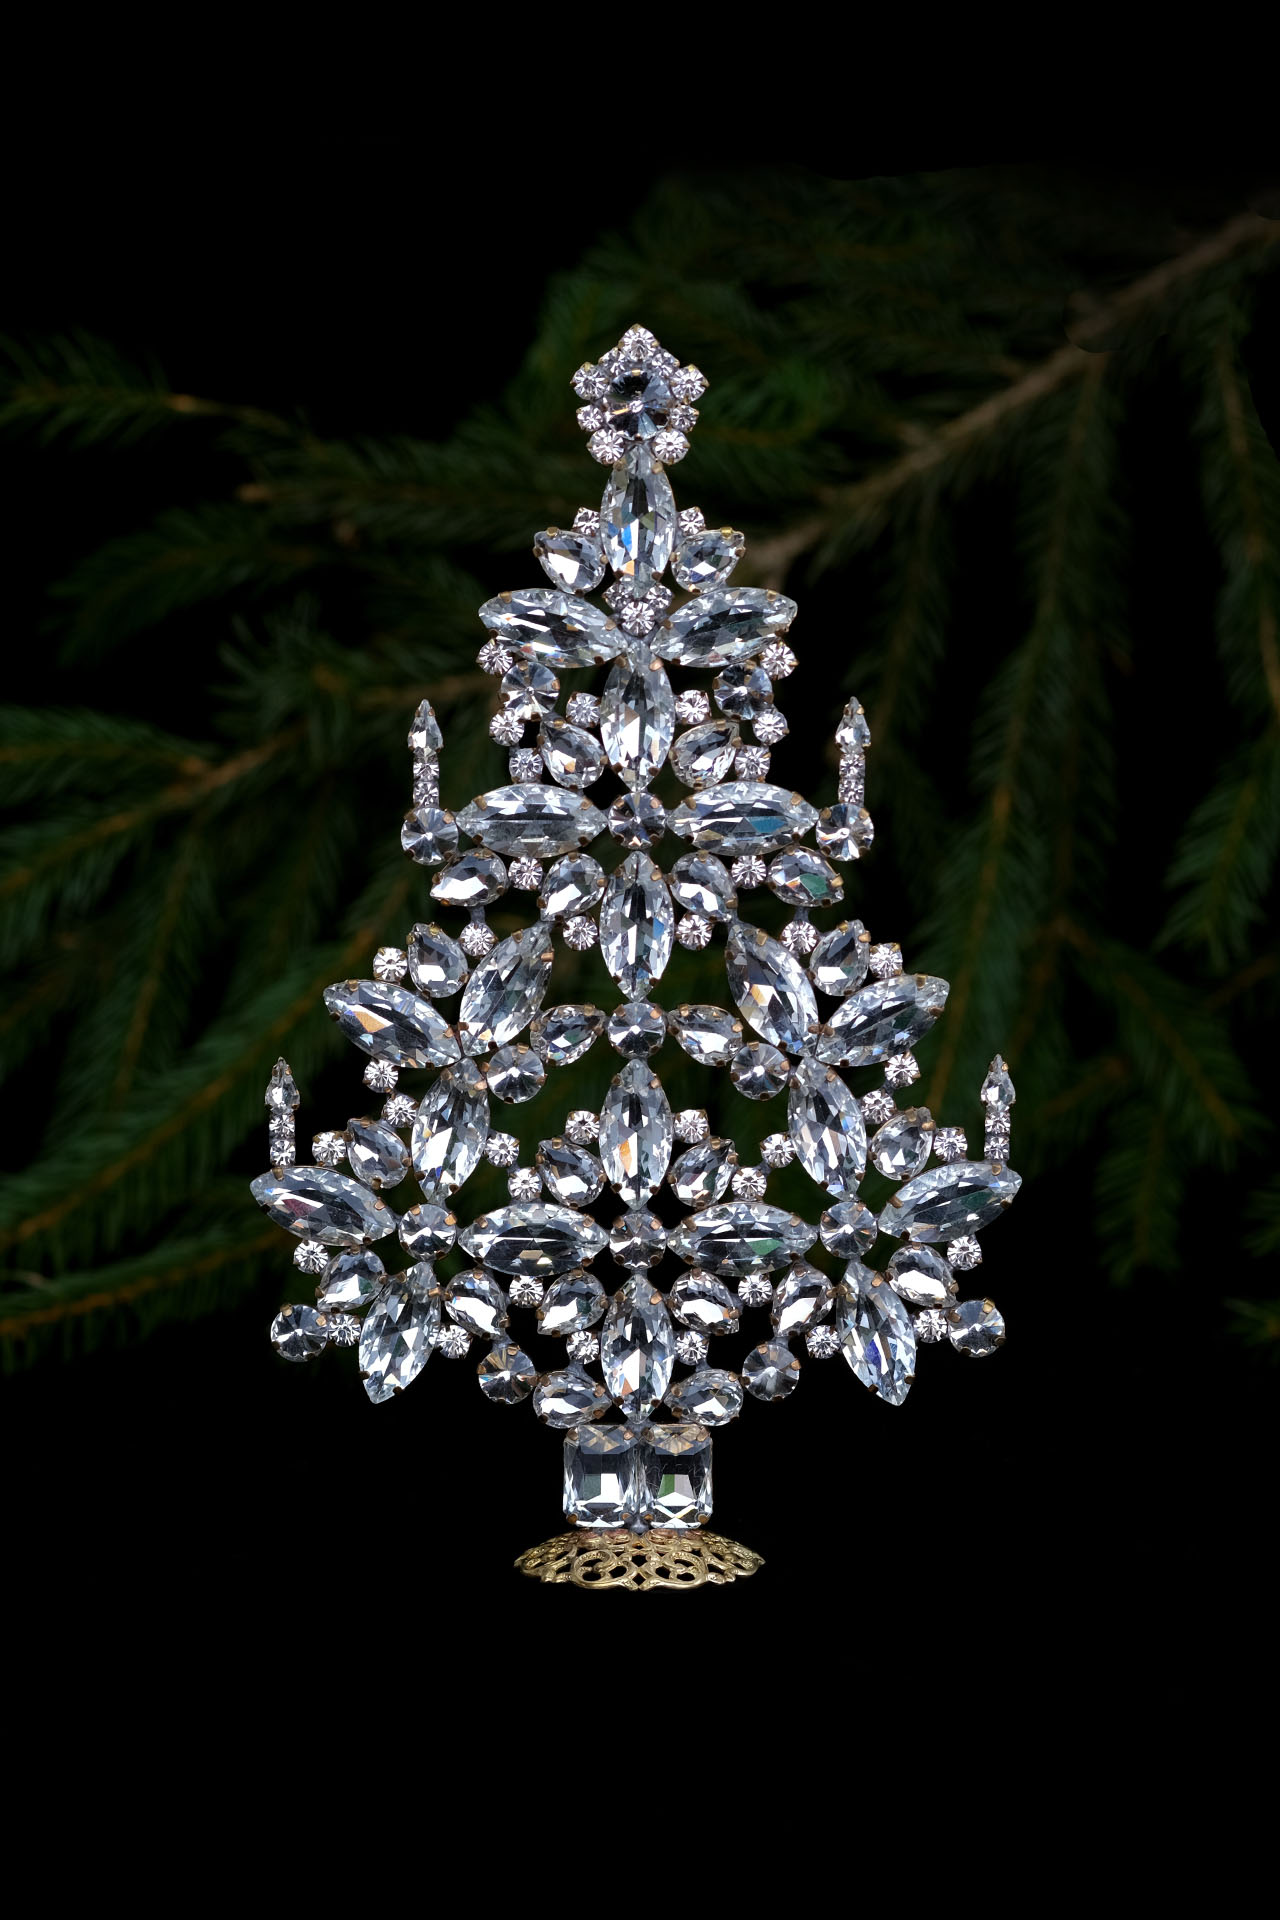 Elegant Czech Xmas Tree, handcrafted with glass ornaments.